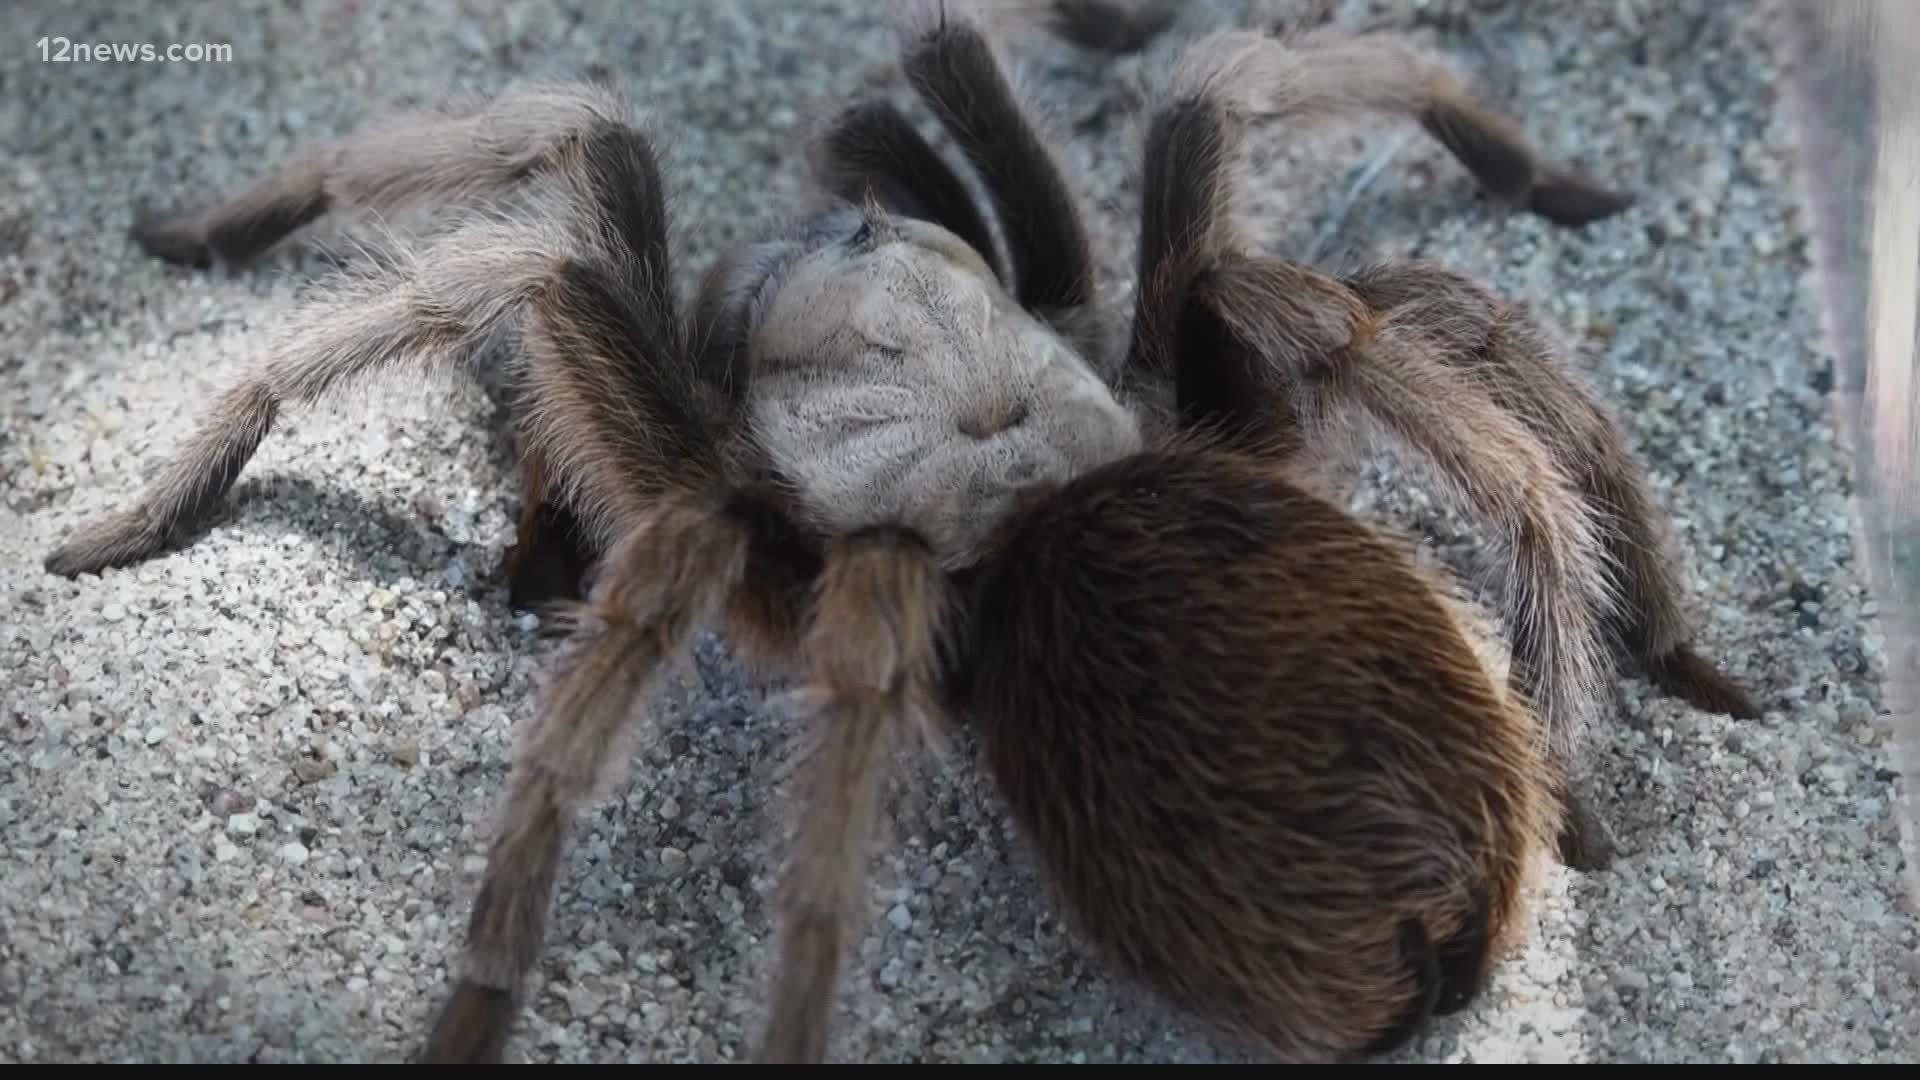 Spiders aren't very popular, especially when they're the size of your hand. But it's tarantula season which means they'll be seen more in the Valley.